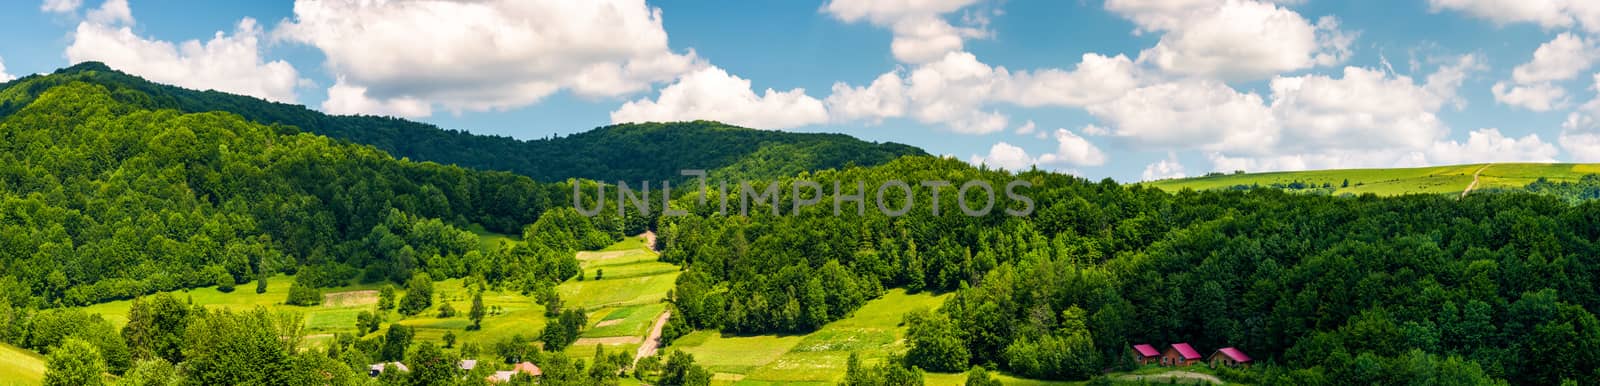 panorama of mountainous rural area in summer. beautiful landscape of the forested hill and village in the valley. agricultural fields on grassy slopes under the cloudy sky